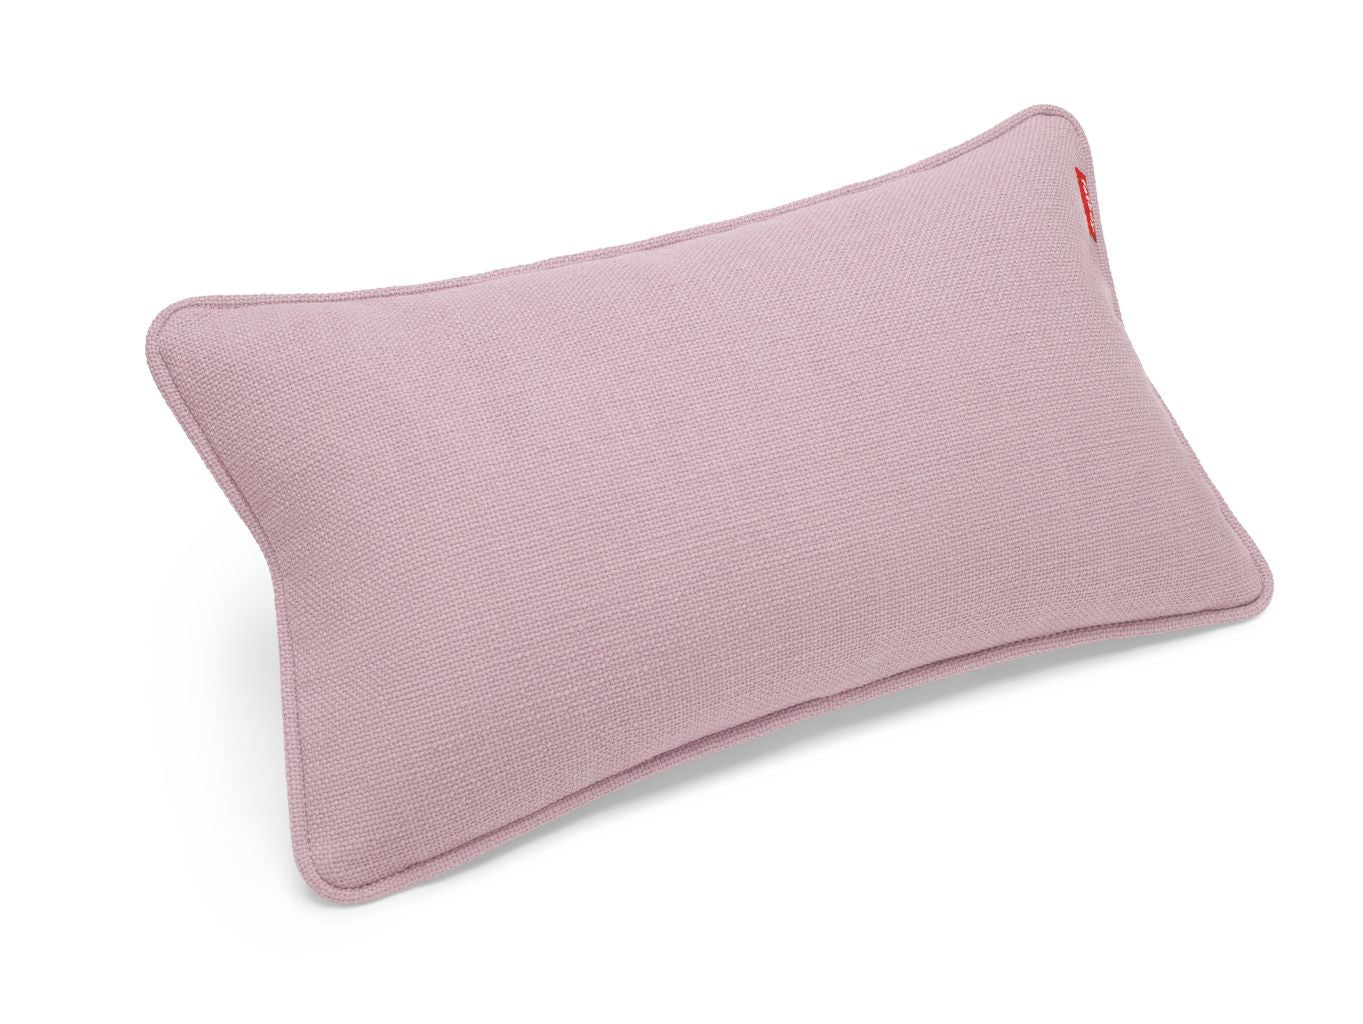 Fatboy Puff Weave Pillow, Bubble Pink